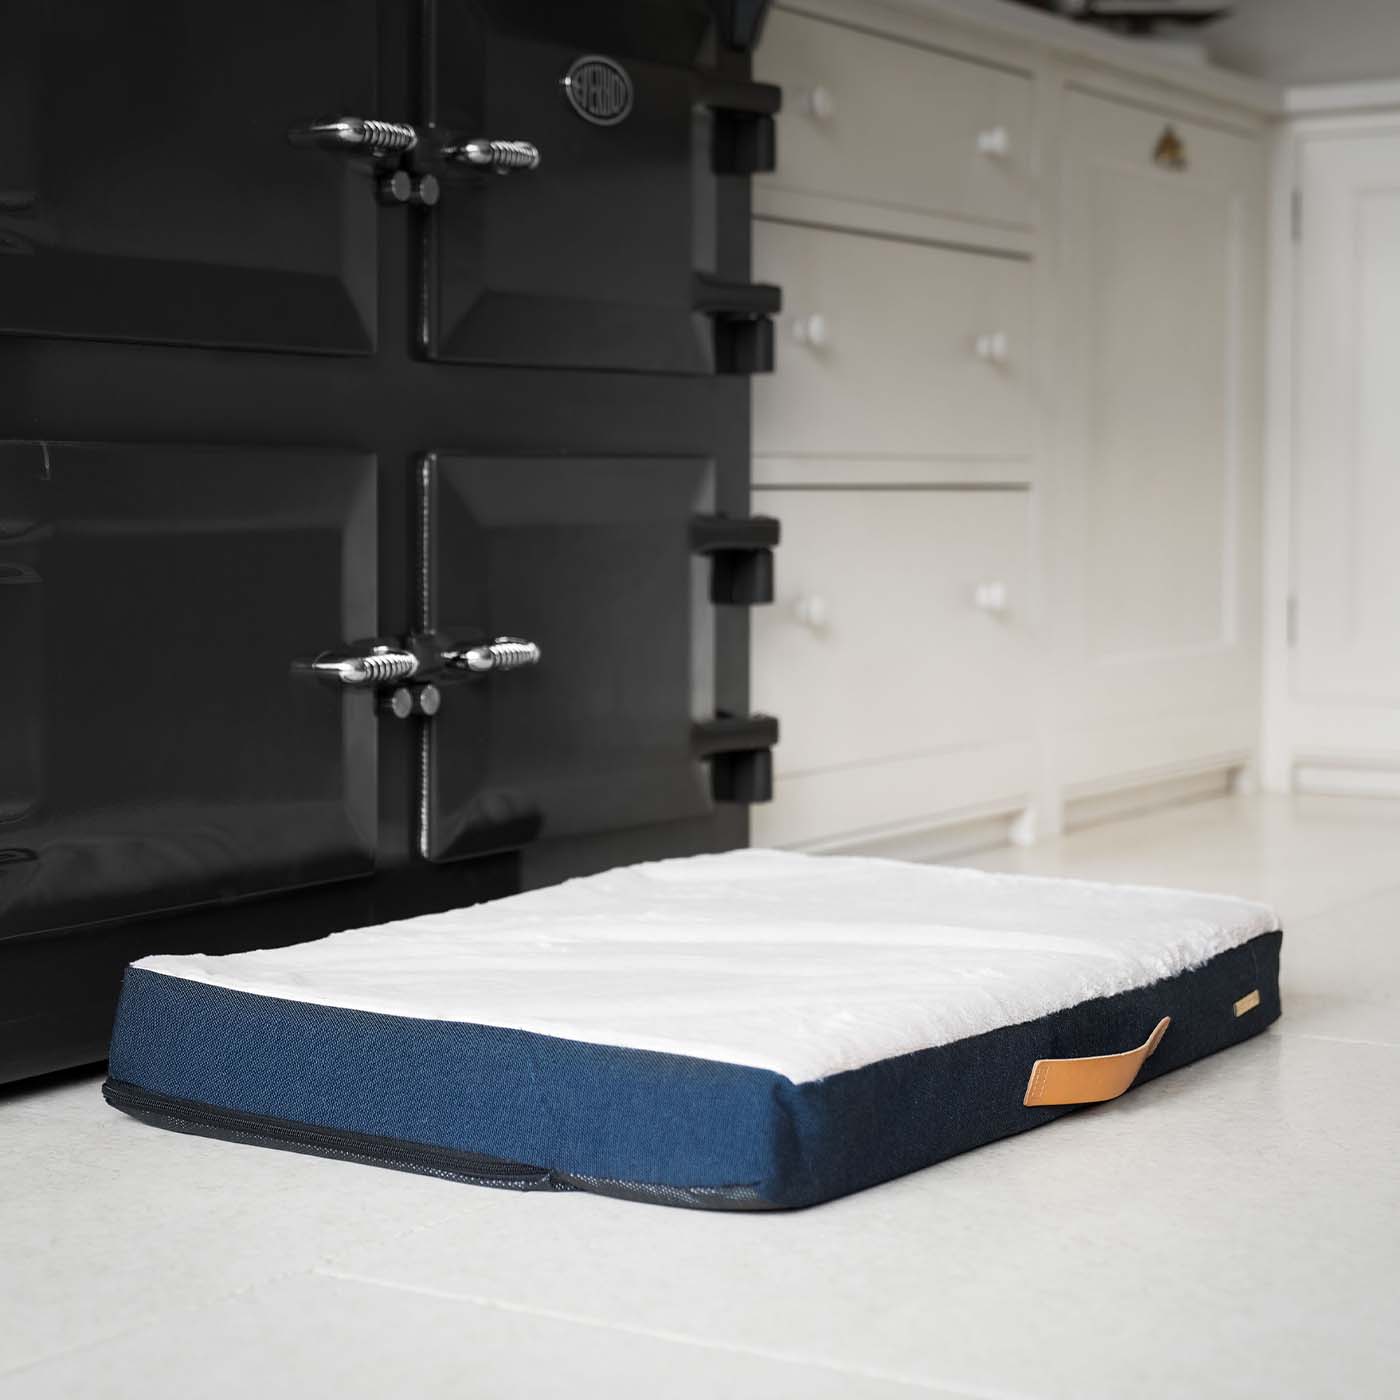 Discover the perfect dog mattress, our luxury essentials twill Orthopaedic mattress in stunning navy denim. Present to your furry friend with this Italian handmade mattress for dogs, available now at Lords & Labradors  